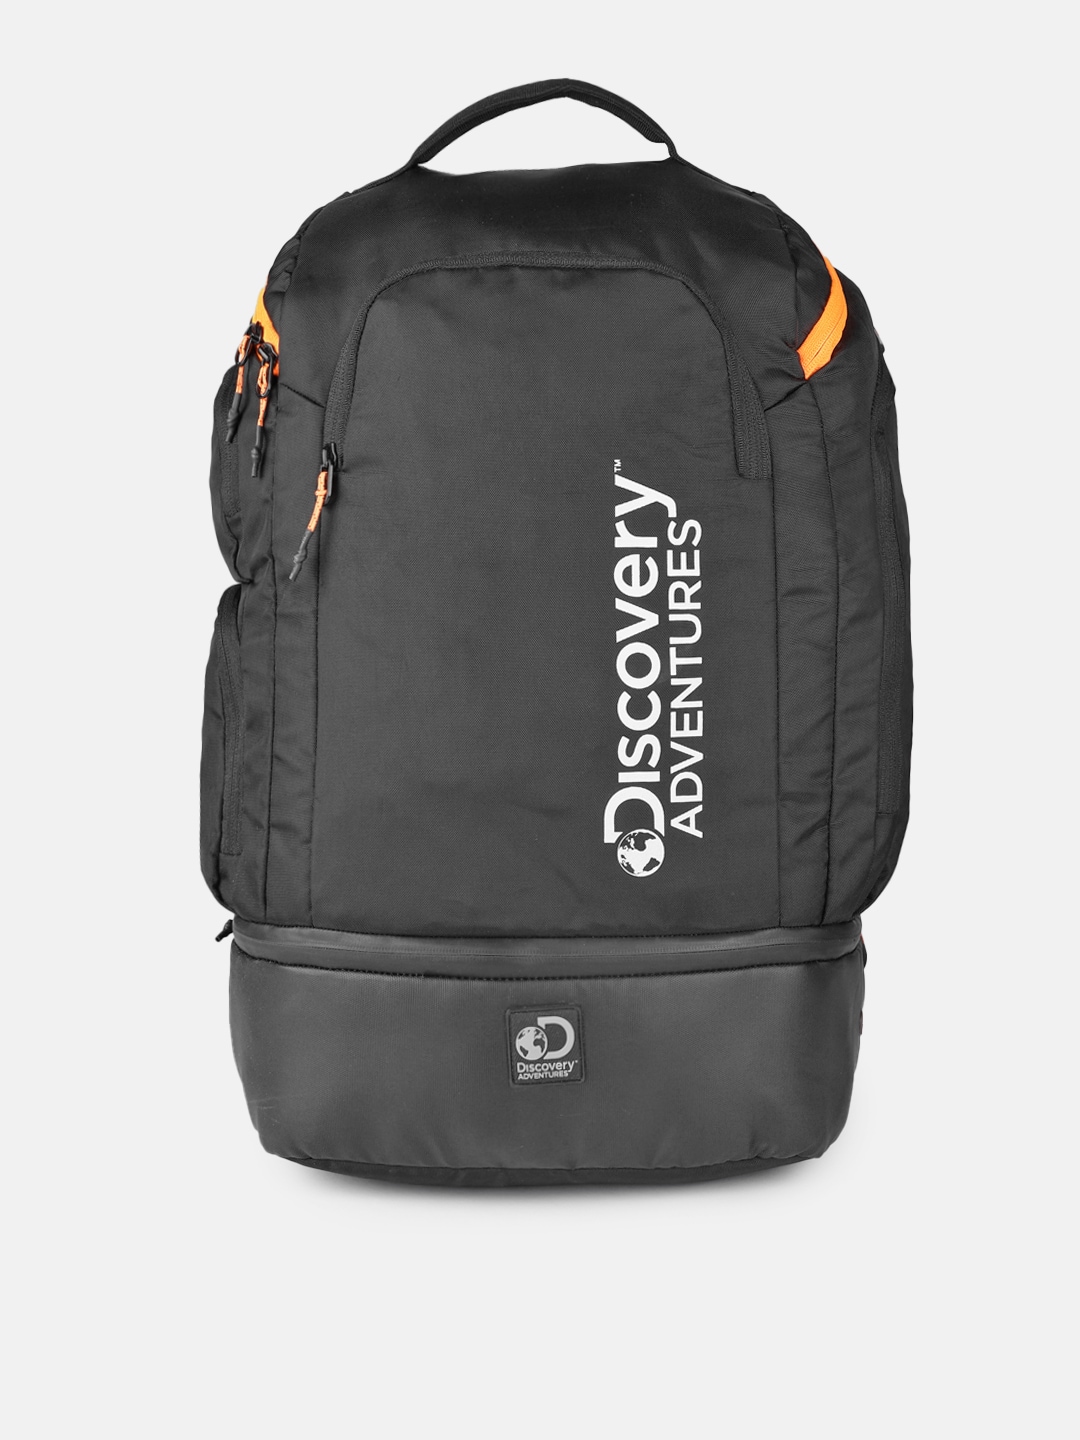 Roadster Unisex Black Cargo Typography Laptop Backpack with Shoe Pocket Price in India